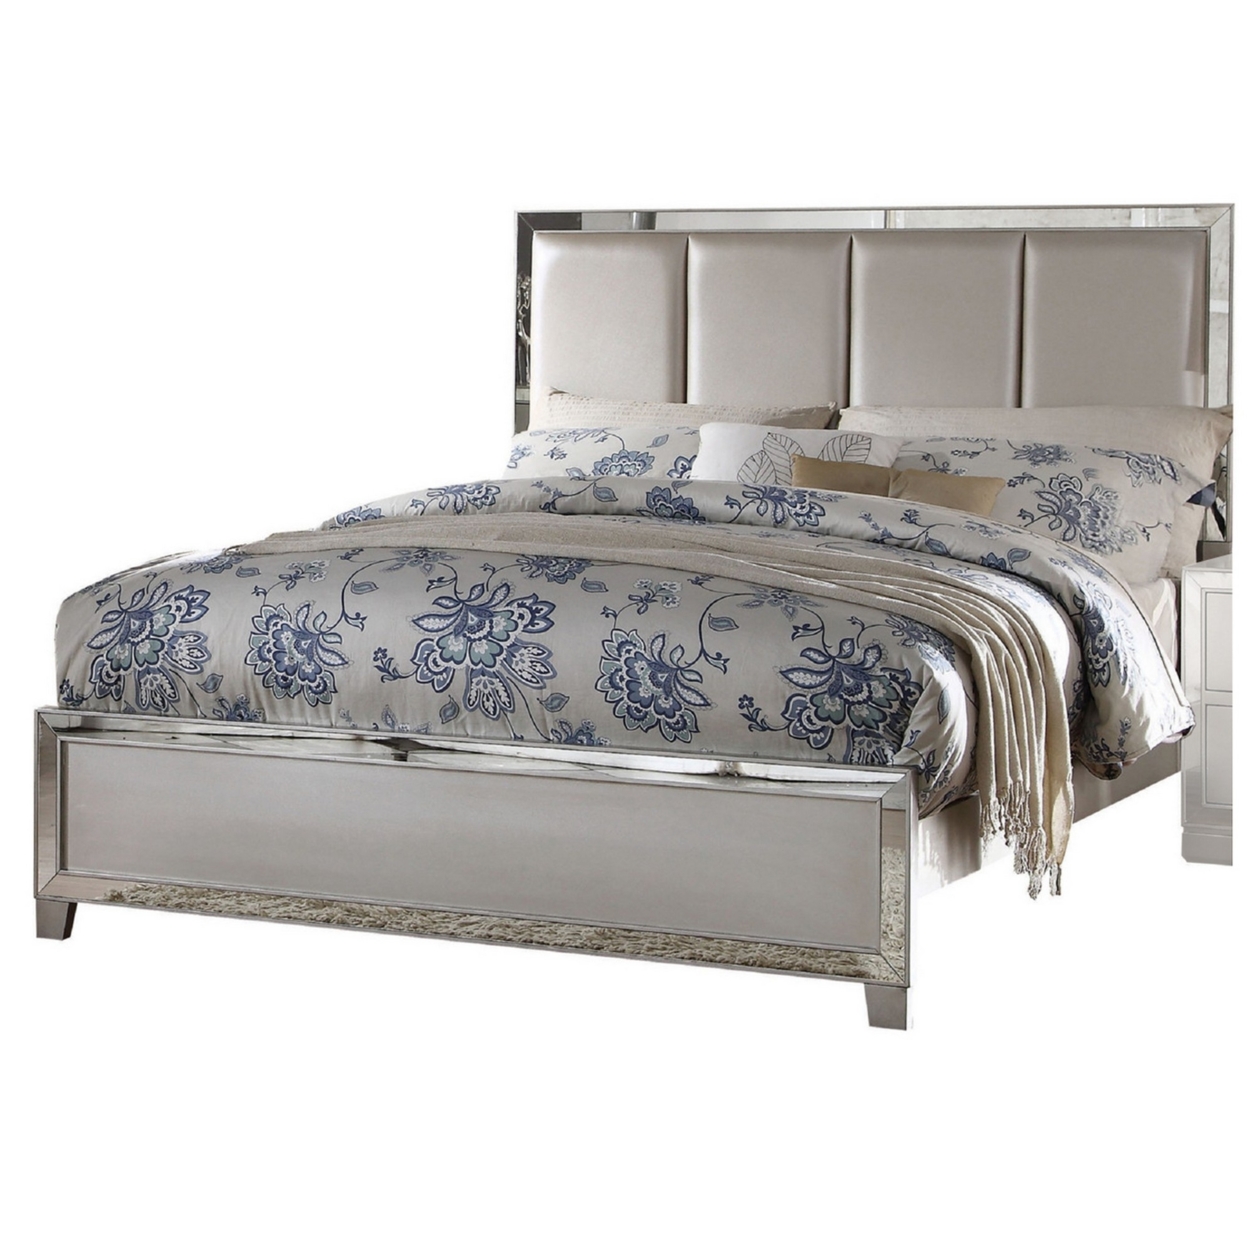 Mirror Inlay Wooden Eastern King Bed With Channel Tufted Headboard, Silver- Saltoro Sherpi